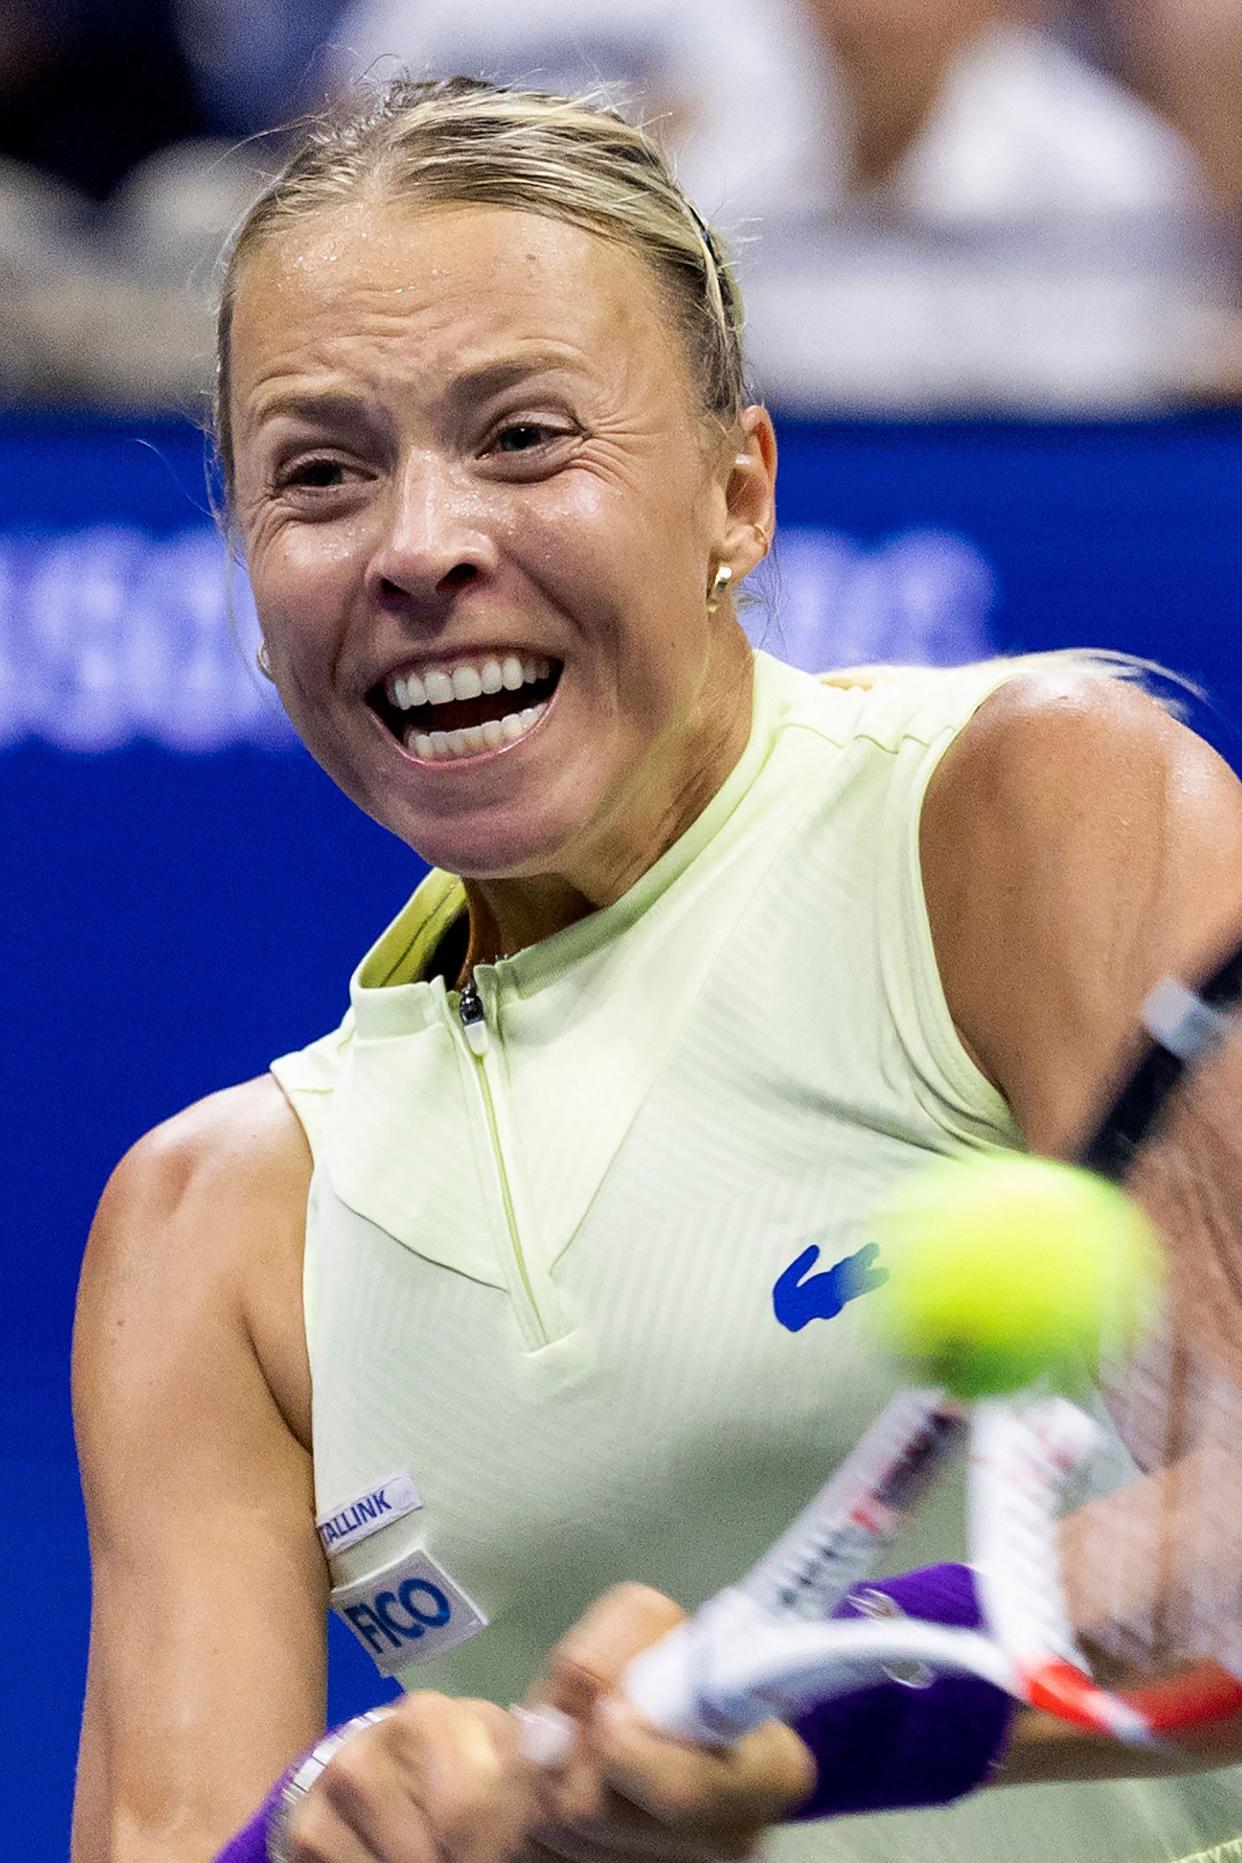 Estonia's Anett Kontaveit hits a return to USA's Serena Williams during their 2022 U.S. Open Tennis tournament women's singles second round match at the USTA Billie Jean King National Tennis Center in New York on Aug. 31, 2022.